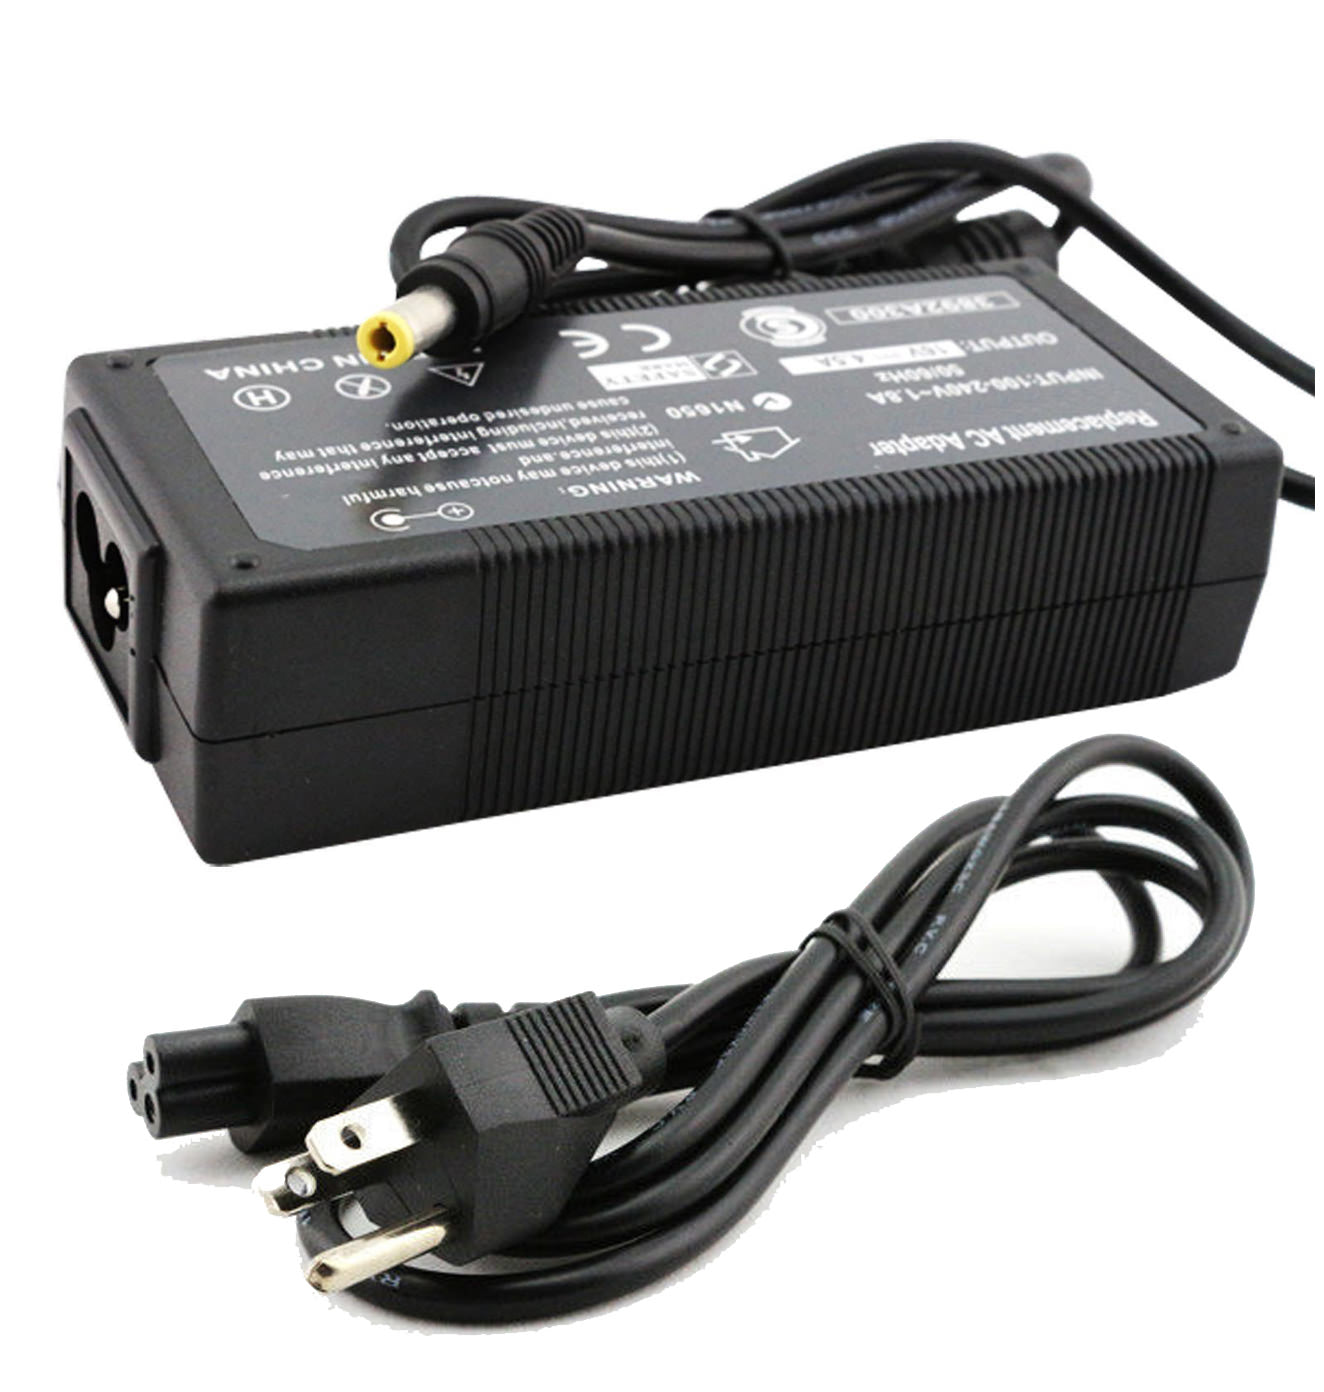 AC Adapter Charger for IBM ThinkPad T21 Notebook.